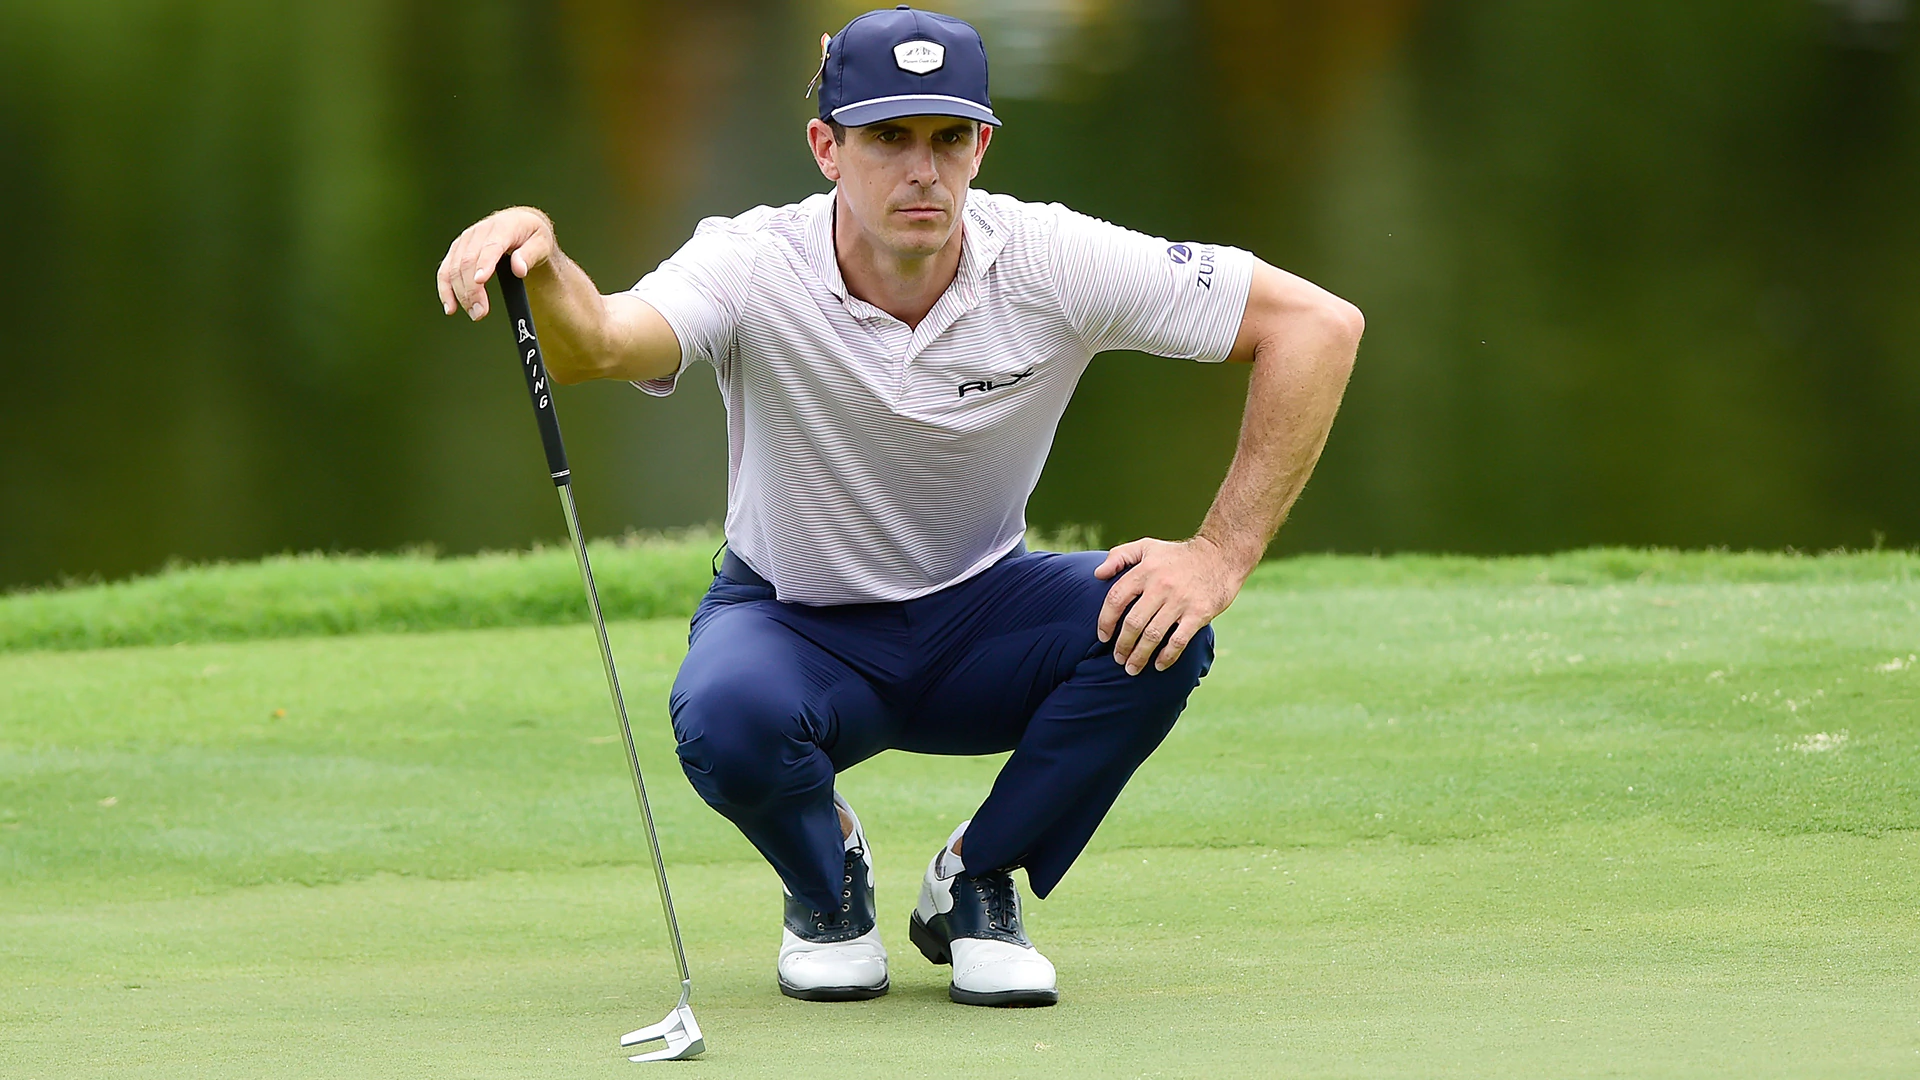 In logjam atop leaderboard, Billy Horschel hoping experience gives him an edge